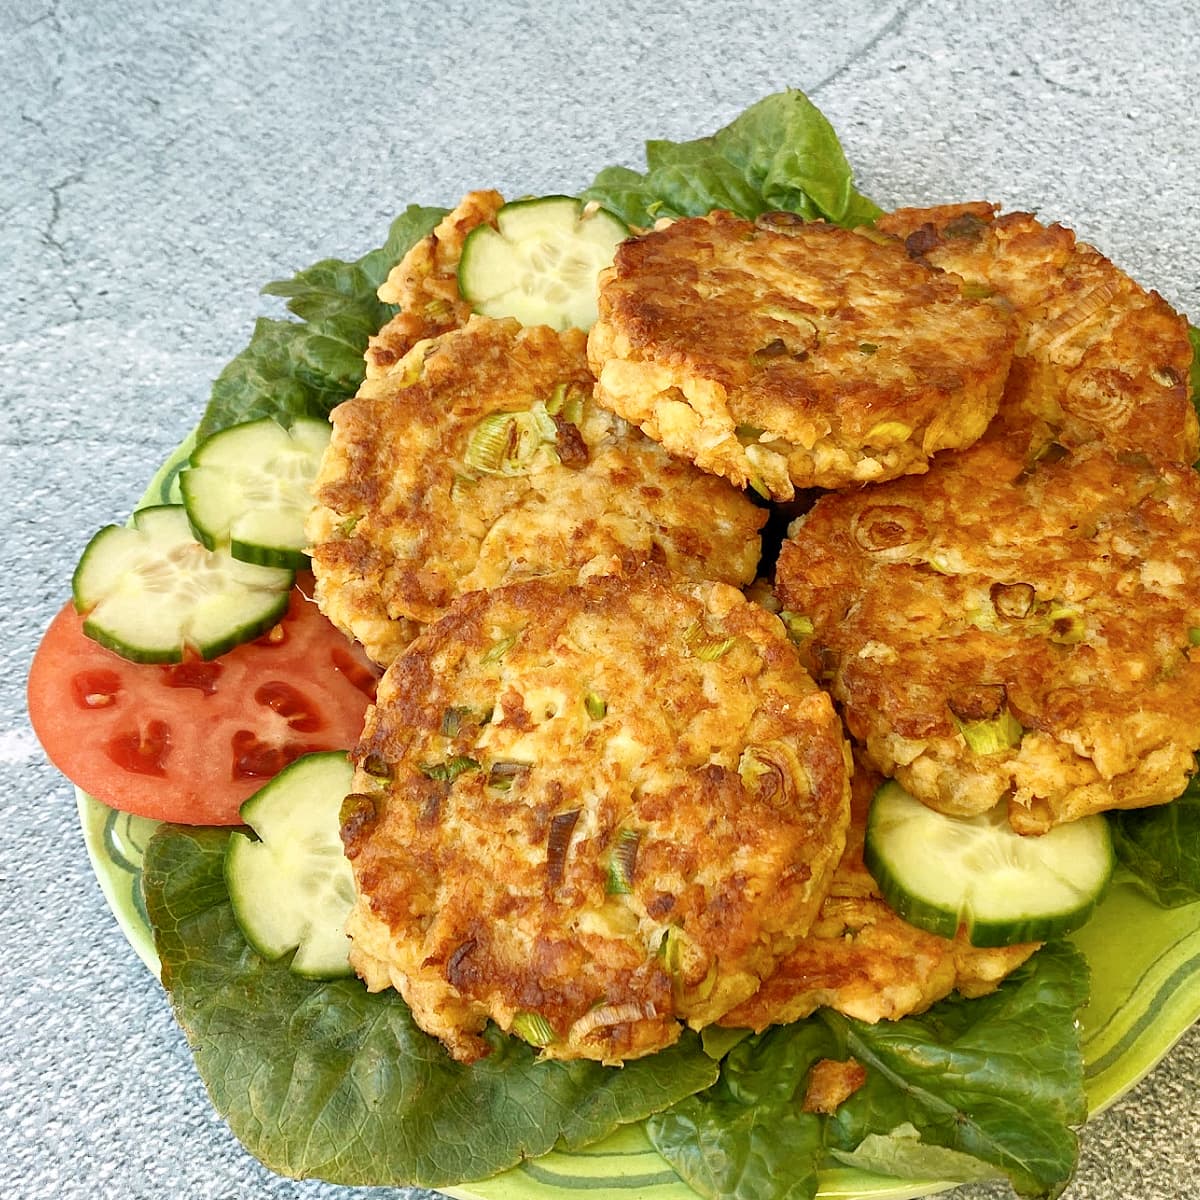 Plate stacked with pan-fried salmon patties, garnished with cucumber slices. 